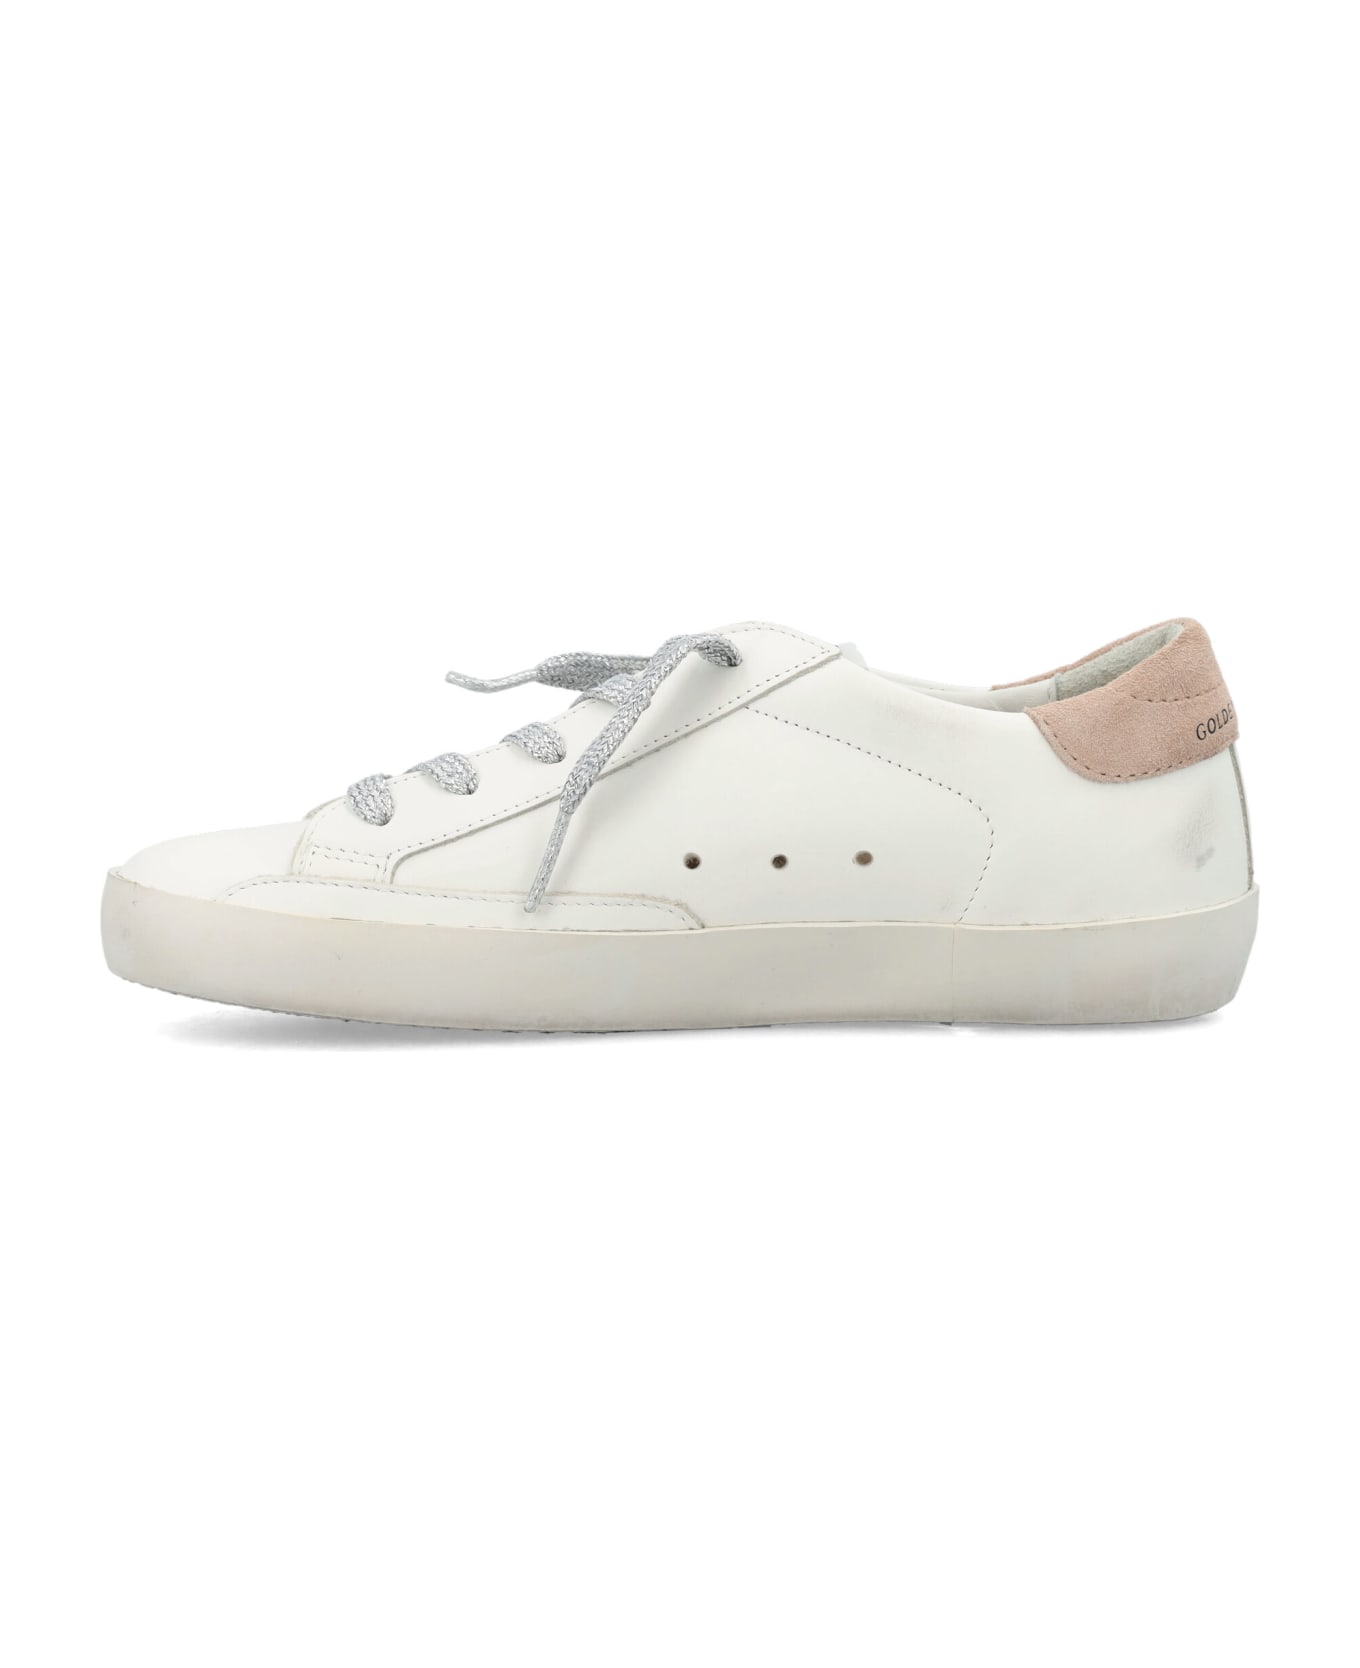 Golden Goose Super Star Sneakers - OPTIC WHITE/PINK